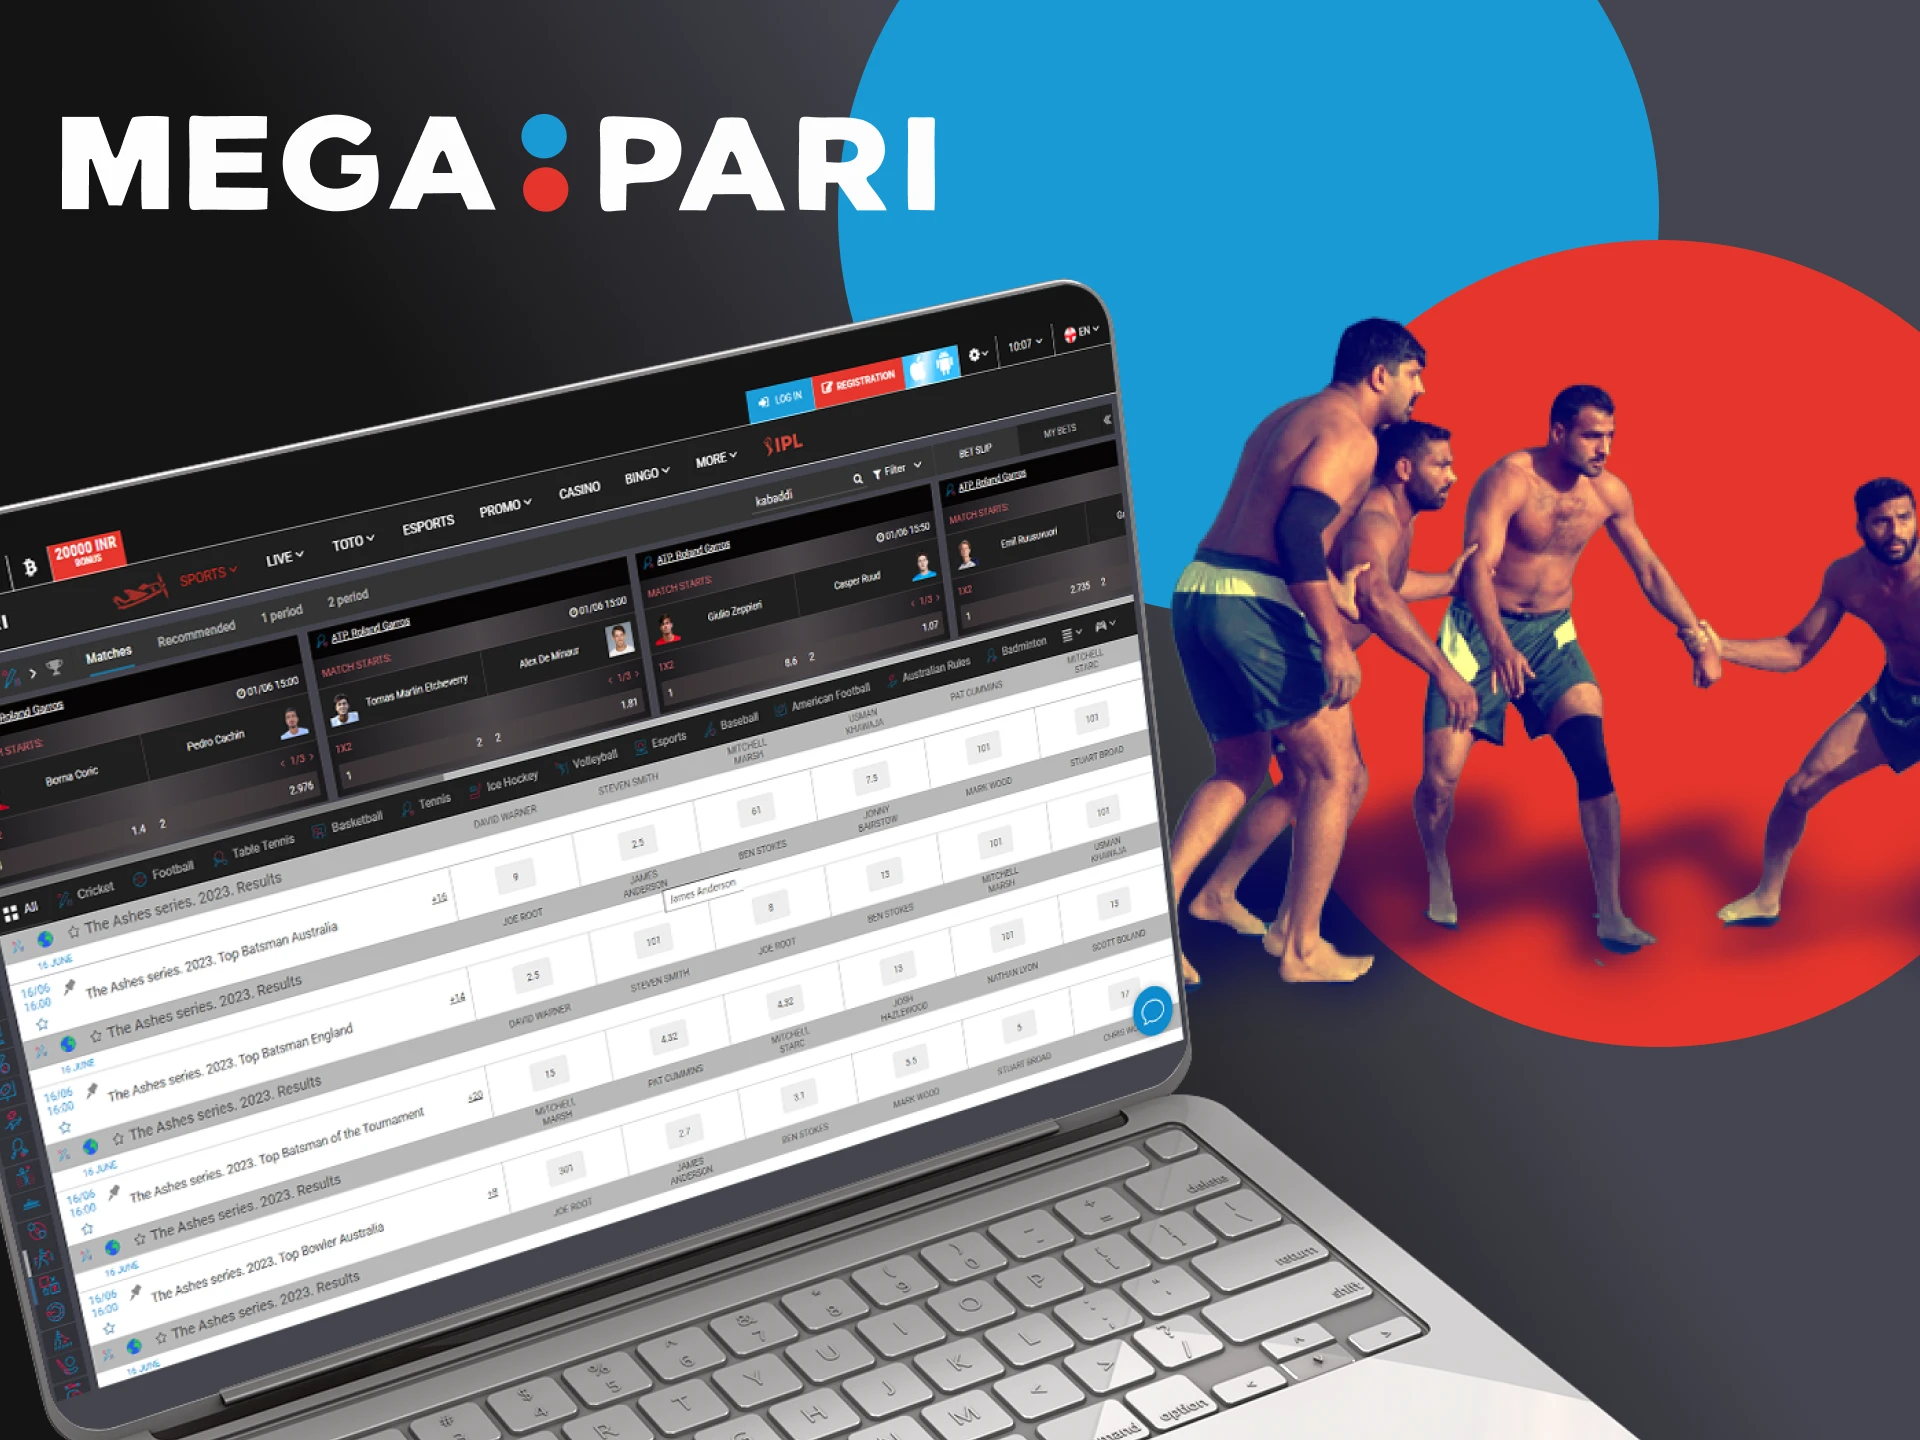 Go to the desired section on Megapari and bet on Kabaddi.